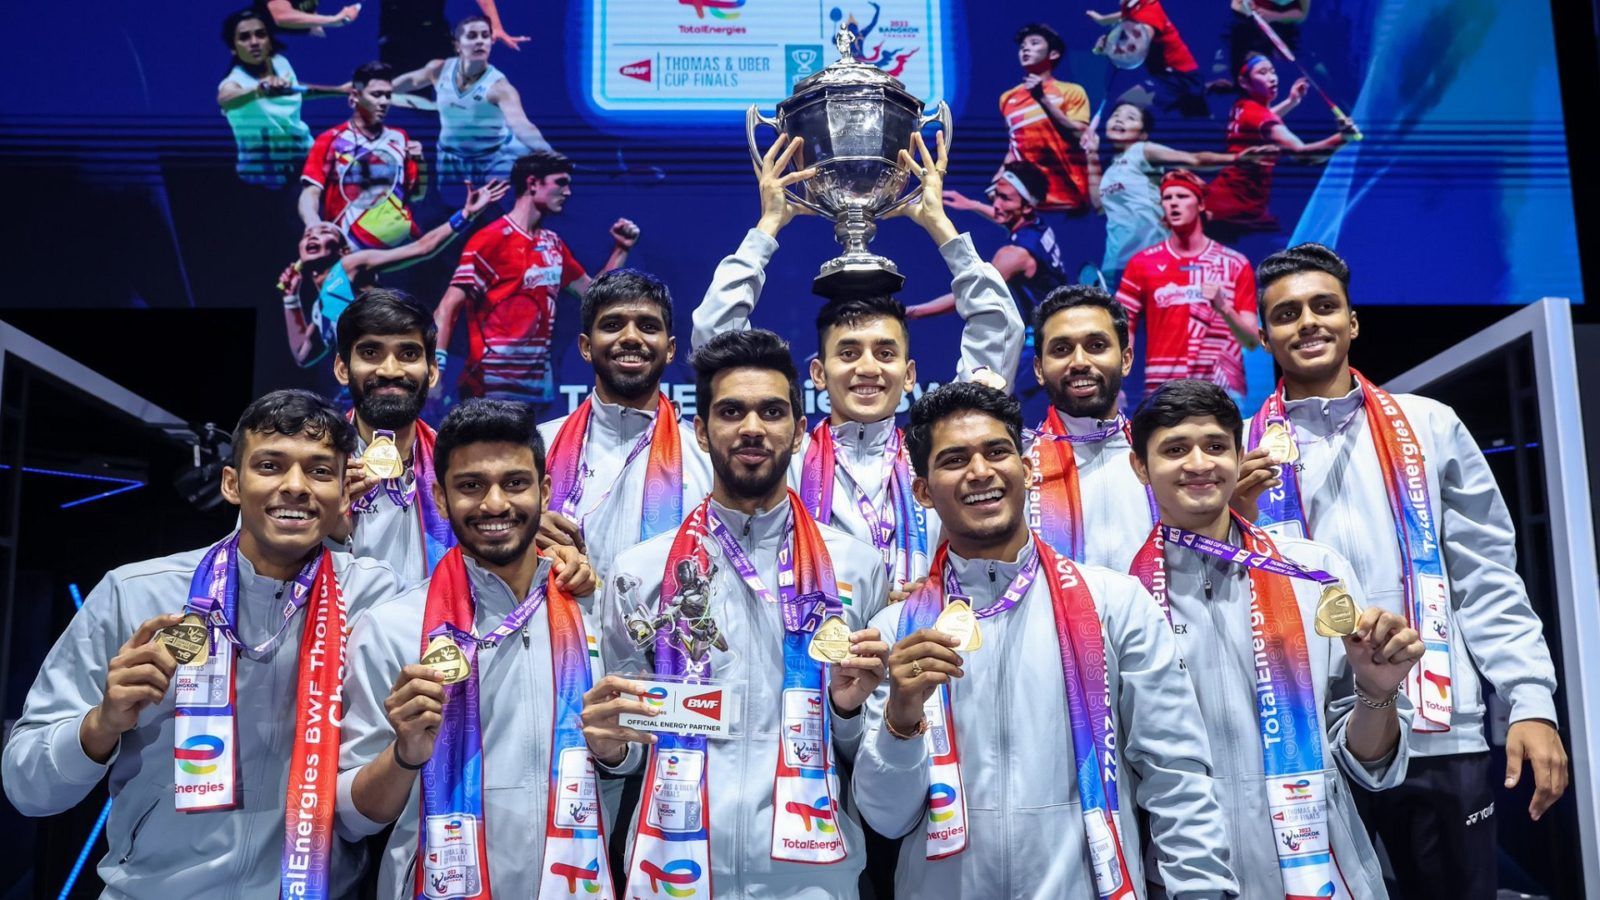 Know the champs: Here’s a look at the glorious journey of the Thomas Cup winners